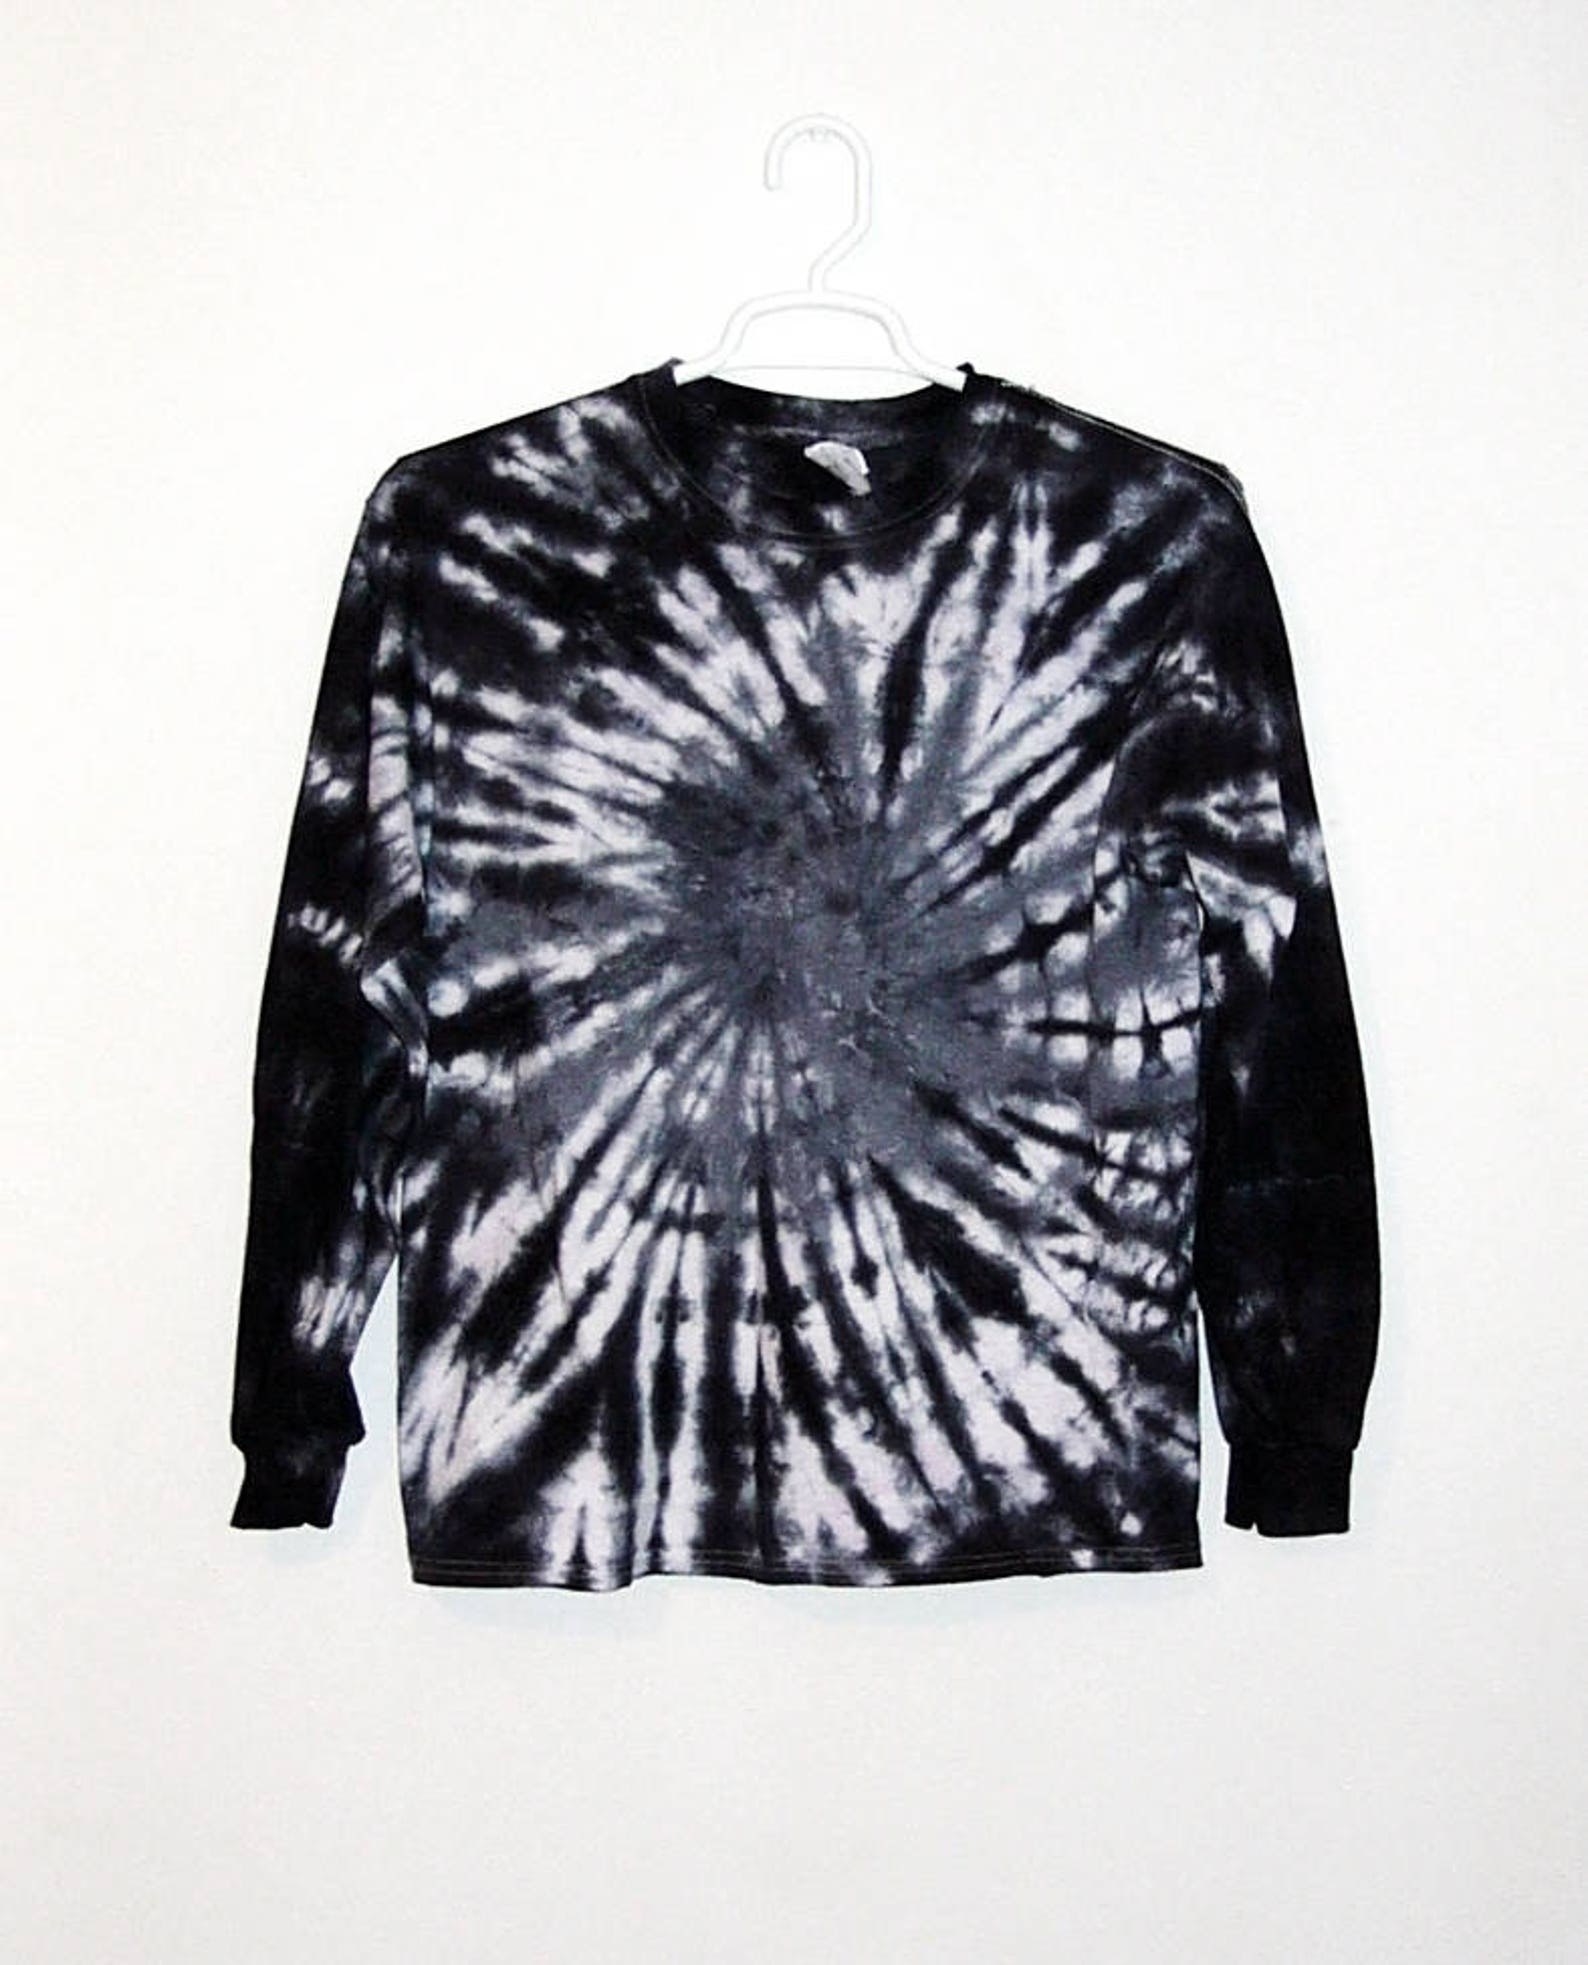 long-sleeved shirt with black and gray tie-dye pattern